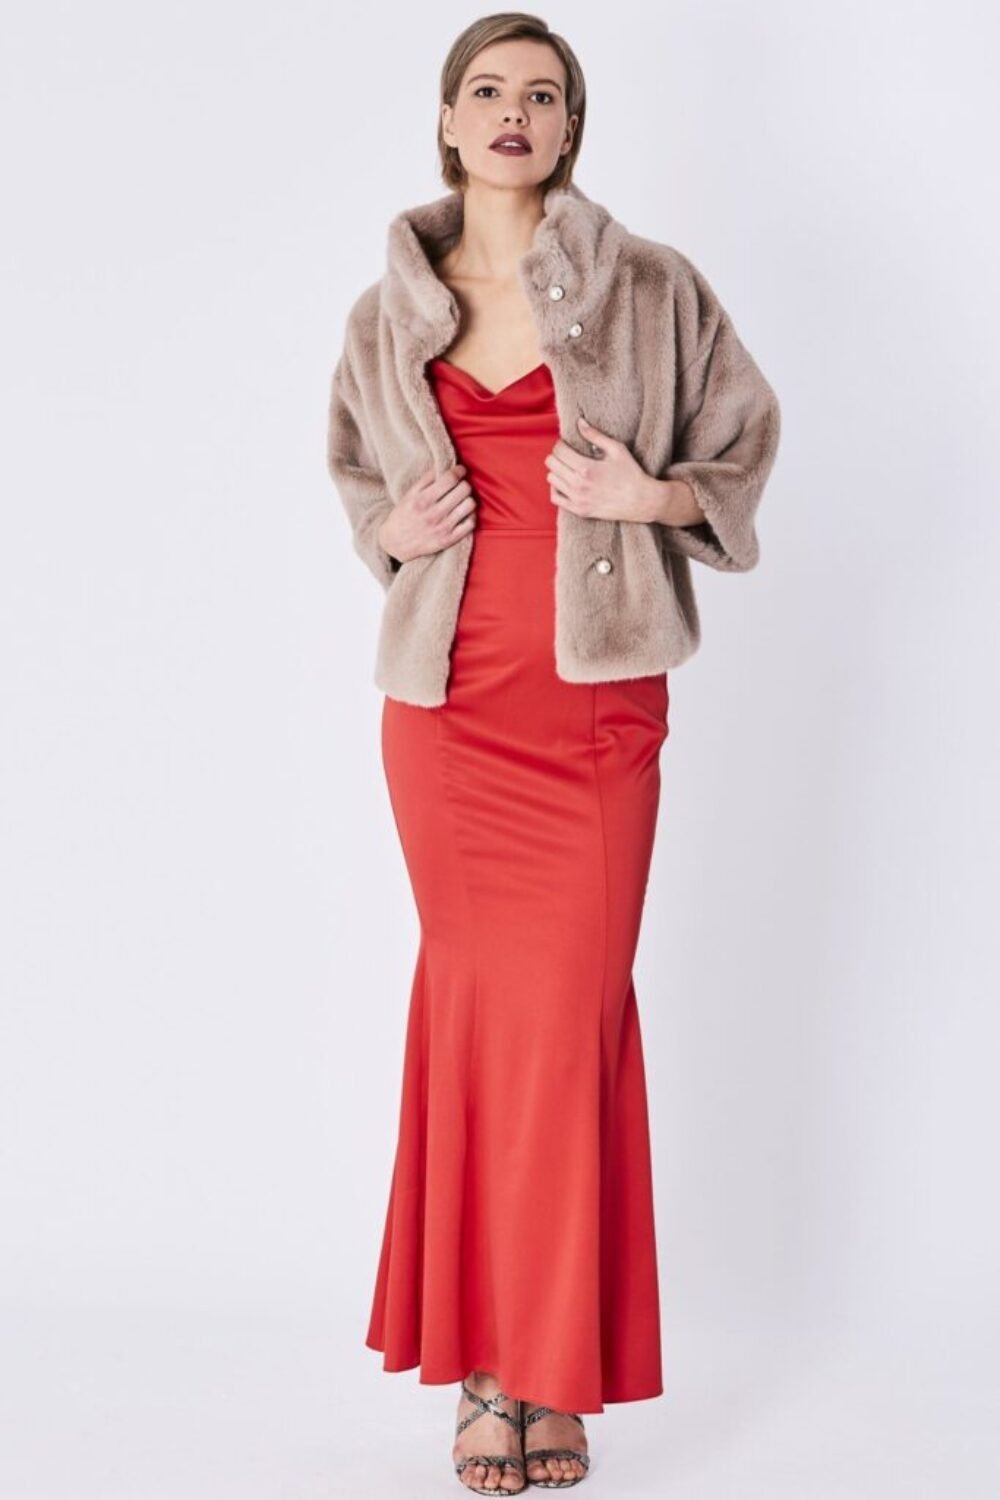 Shop Lux Mocha Faux Fur Jacket With Pearls and women's luxury and designer clothes at www.lux-apparel.co.uk